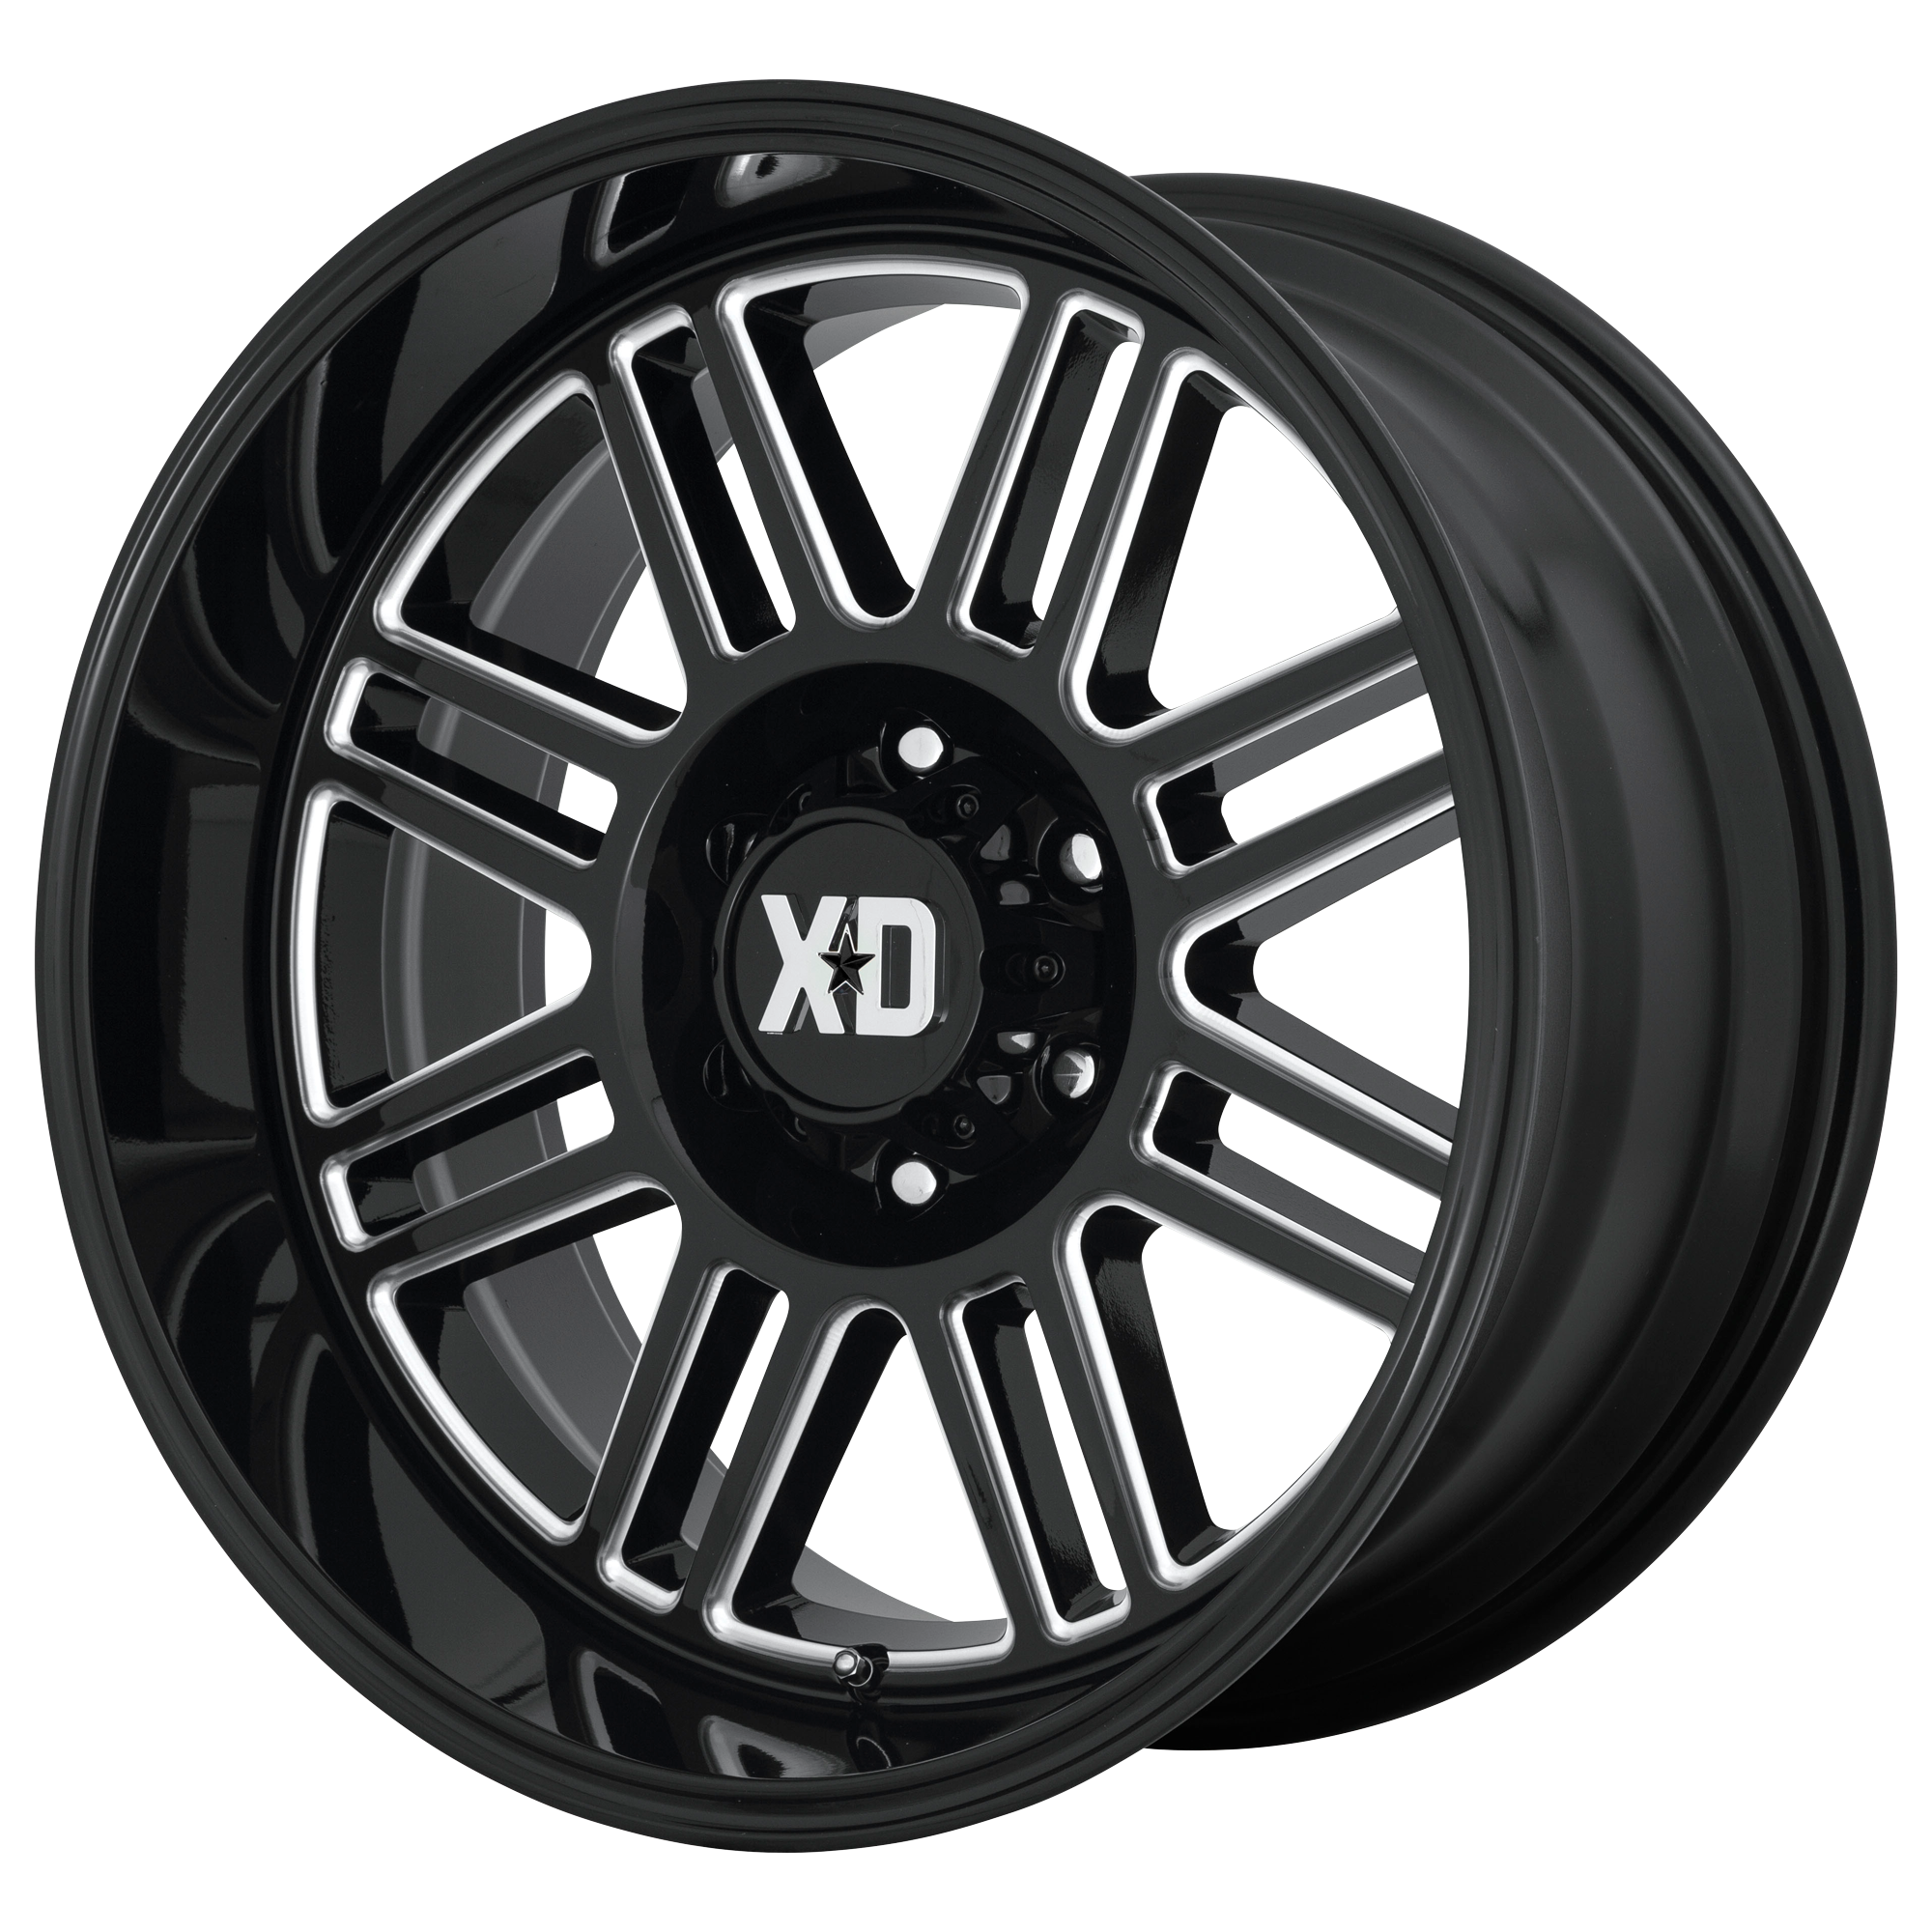 CAGE 20x10 6x135.00 GLOSS BLACK MILLED (-18 mm) - Tires and Engine Performance